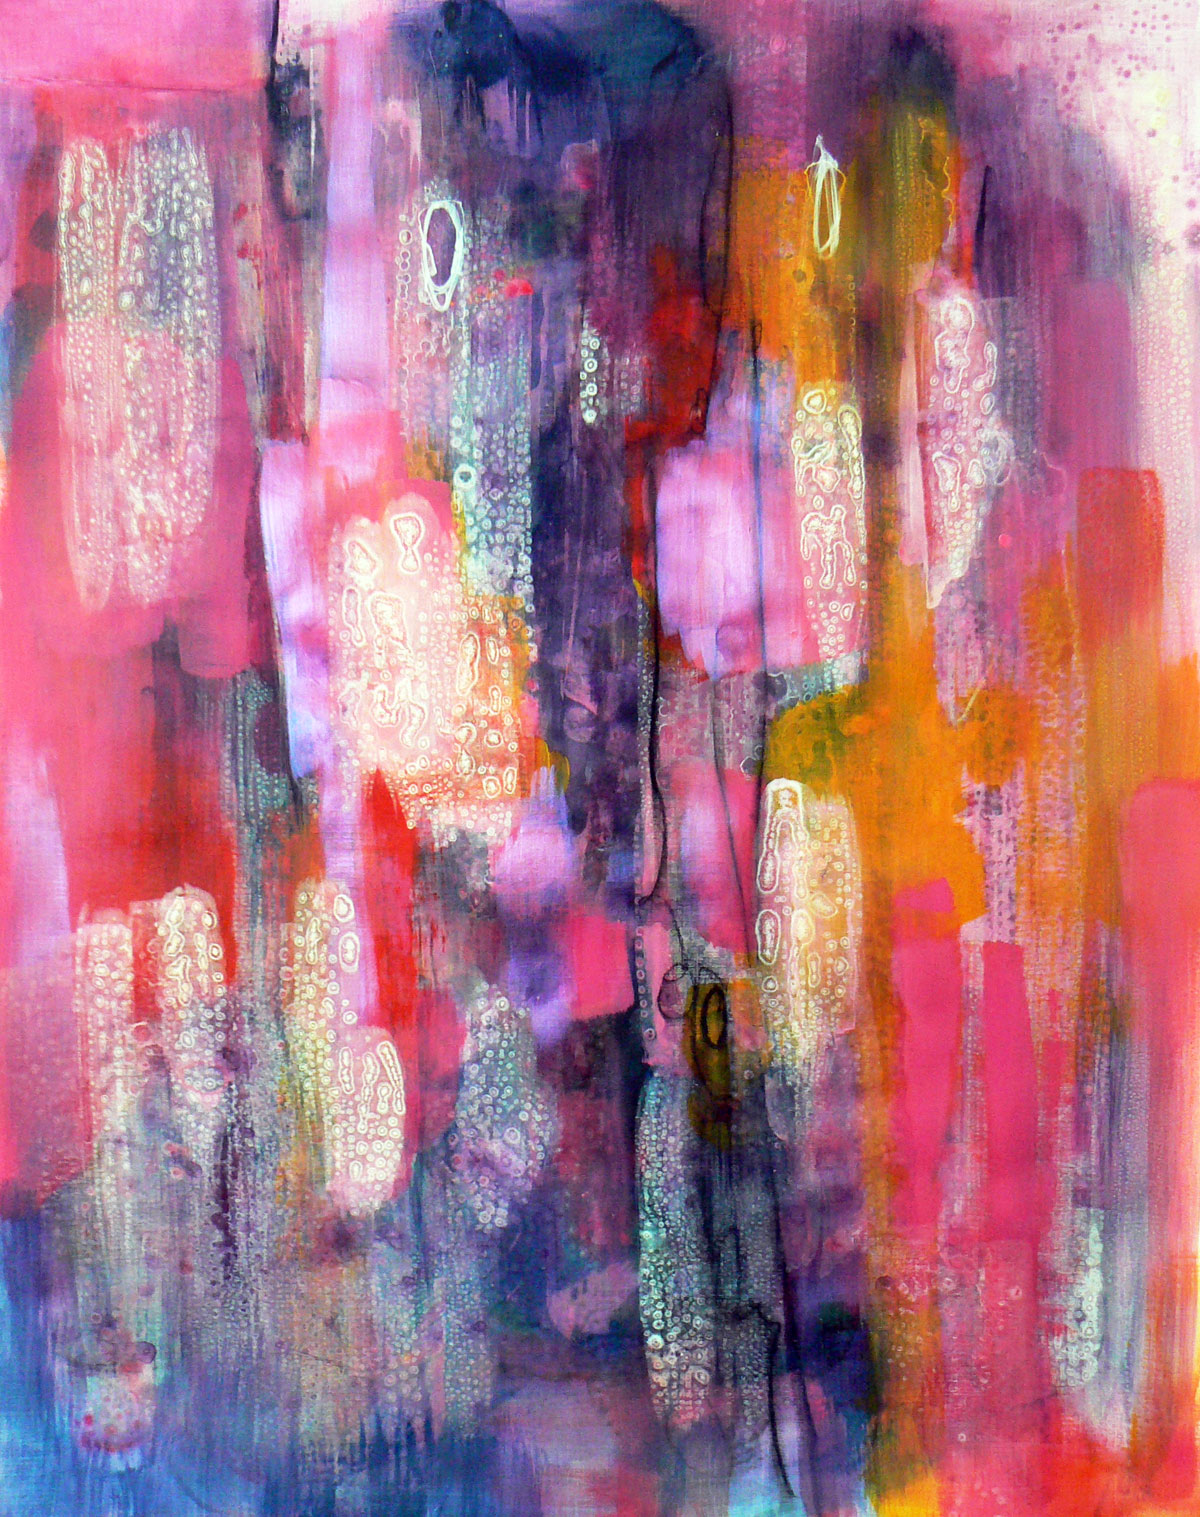 Erased, 2015 Acrylic painting by Carolynne Coulson